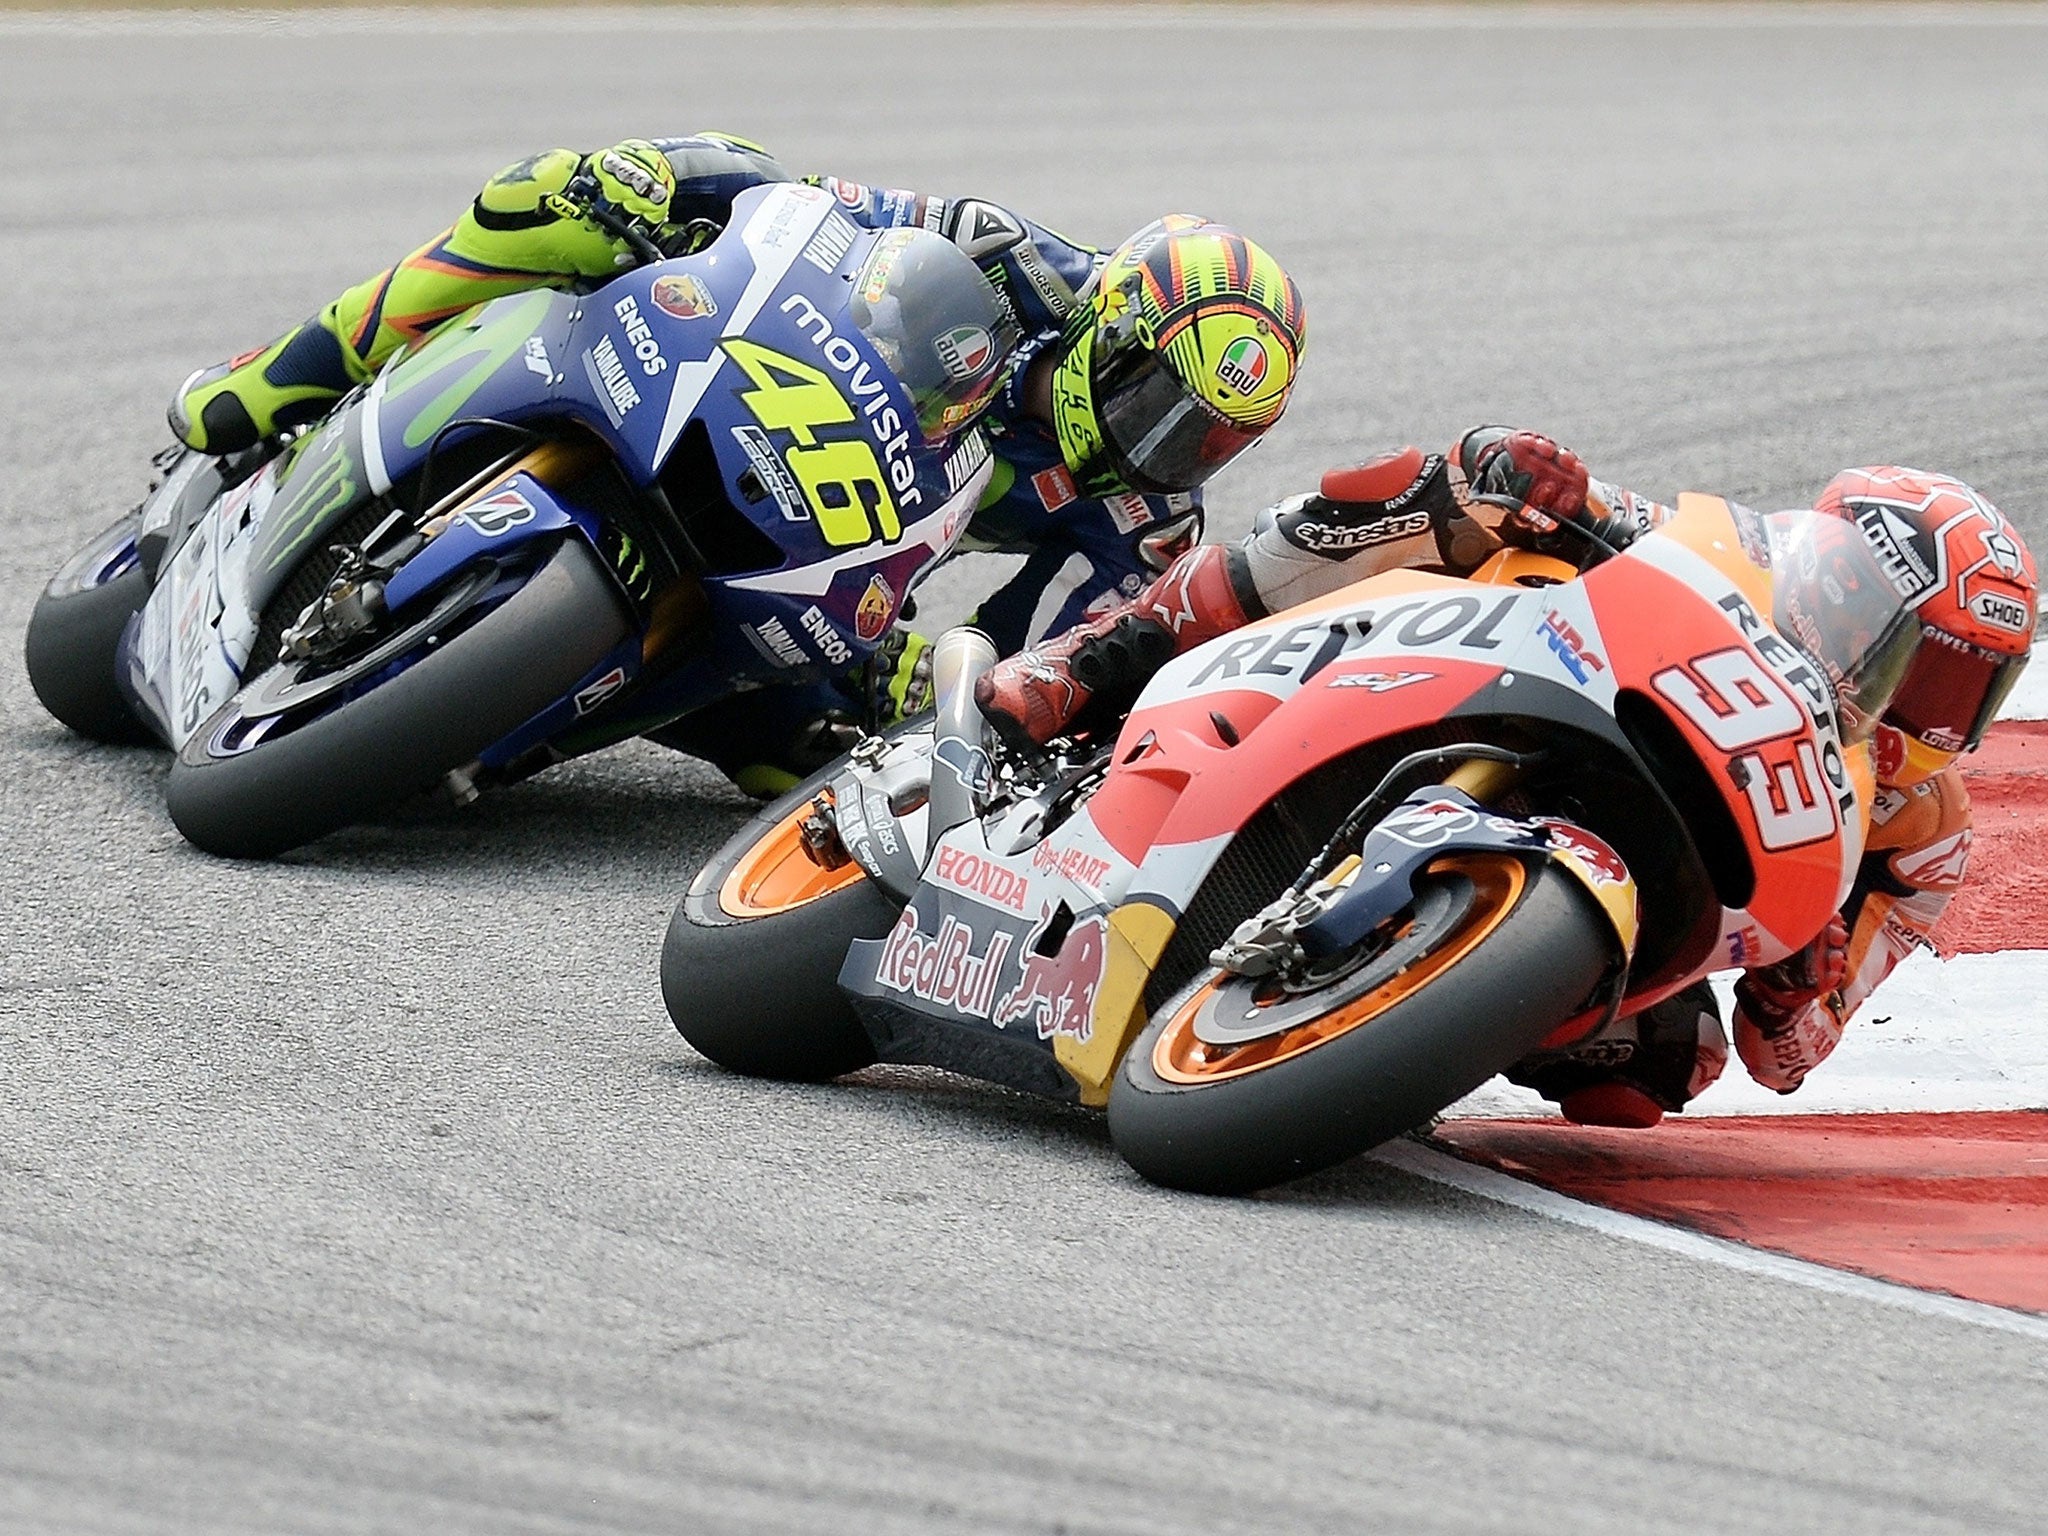 Motogp Malaysian Grand Prix 15 Valentino Rossi Dealt Huge Blow With Penalty After Kicking Marc Marquez Off His Honda The Independent The Independent